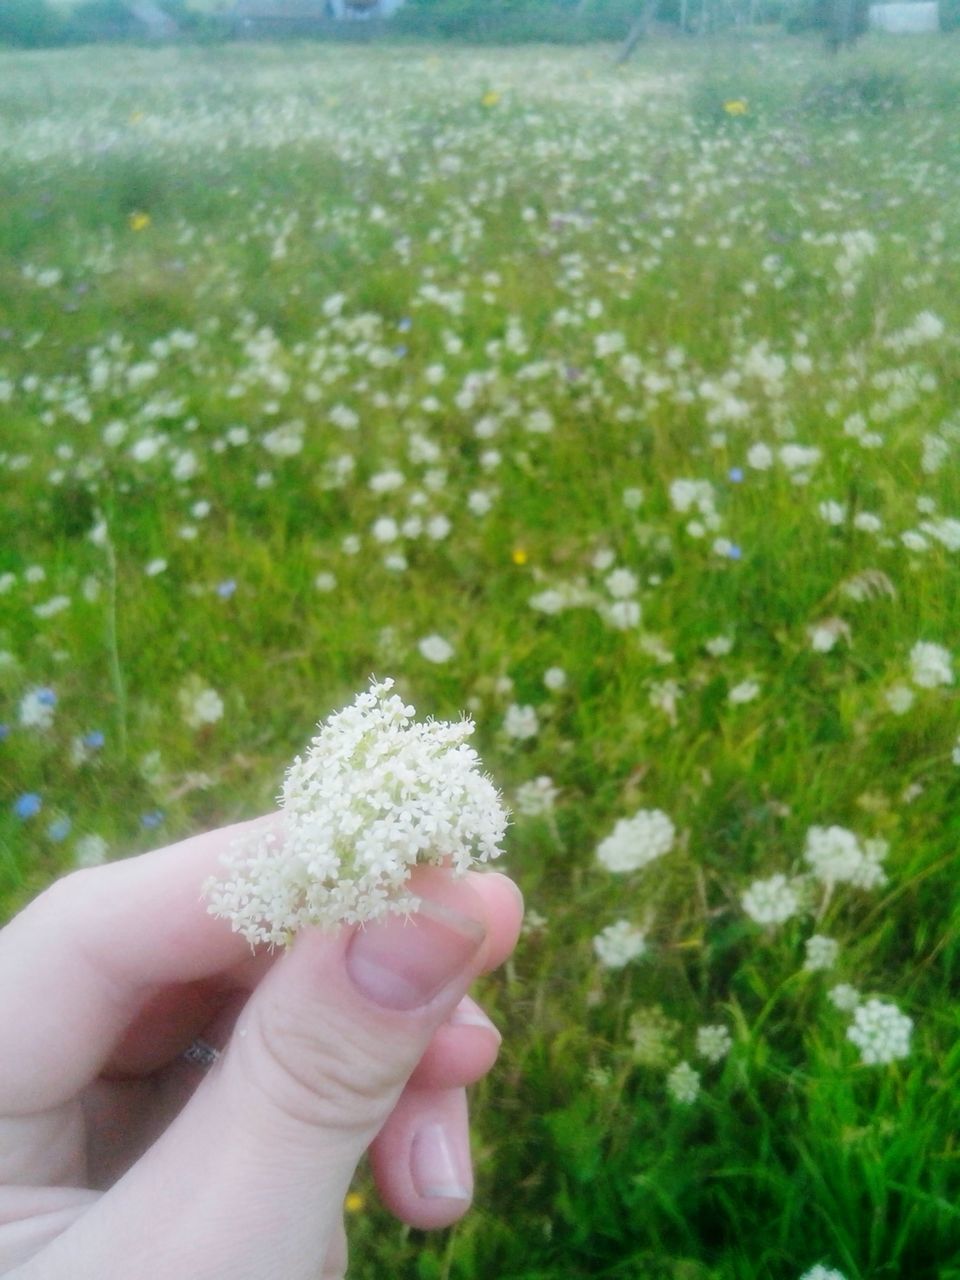 person, holding, freshness, flower, part of, cropped, human finger, fragility, unrecognizable person, personal perspective, focus on foreground, close-up, flower head, white color, dandelion, field, nature